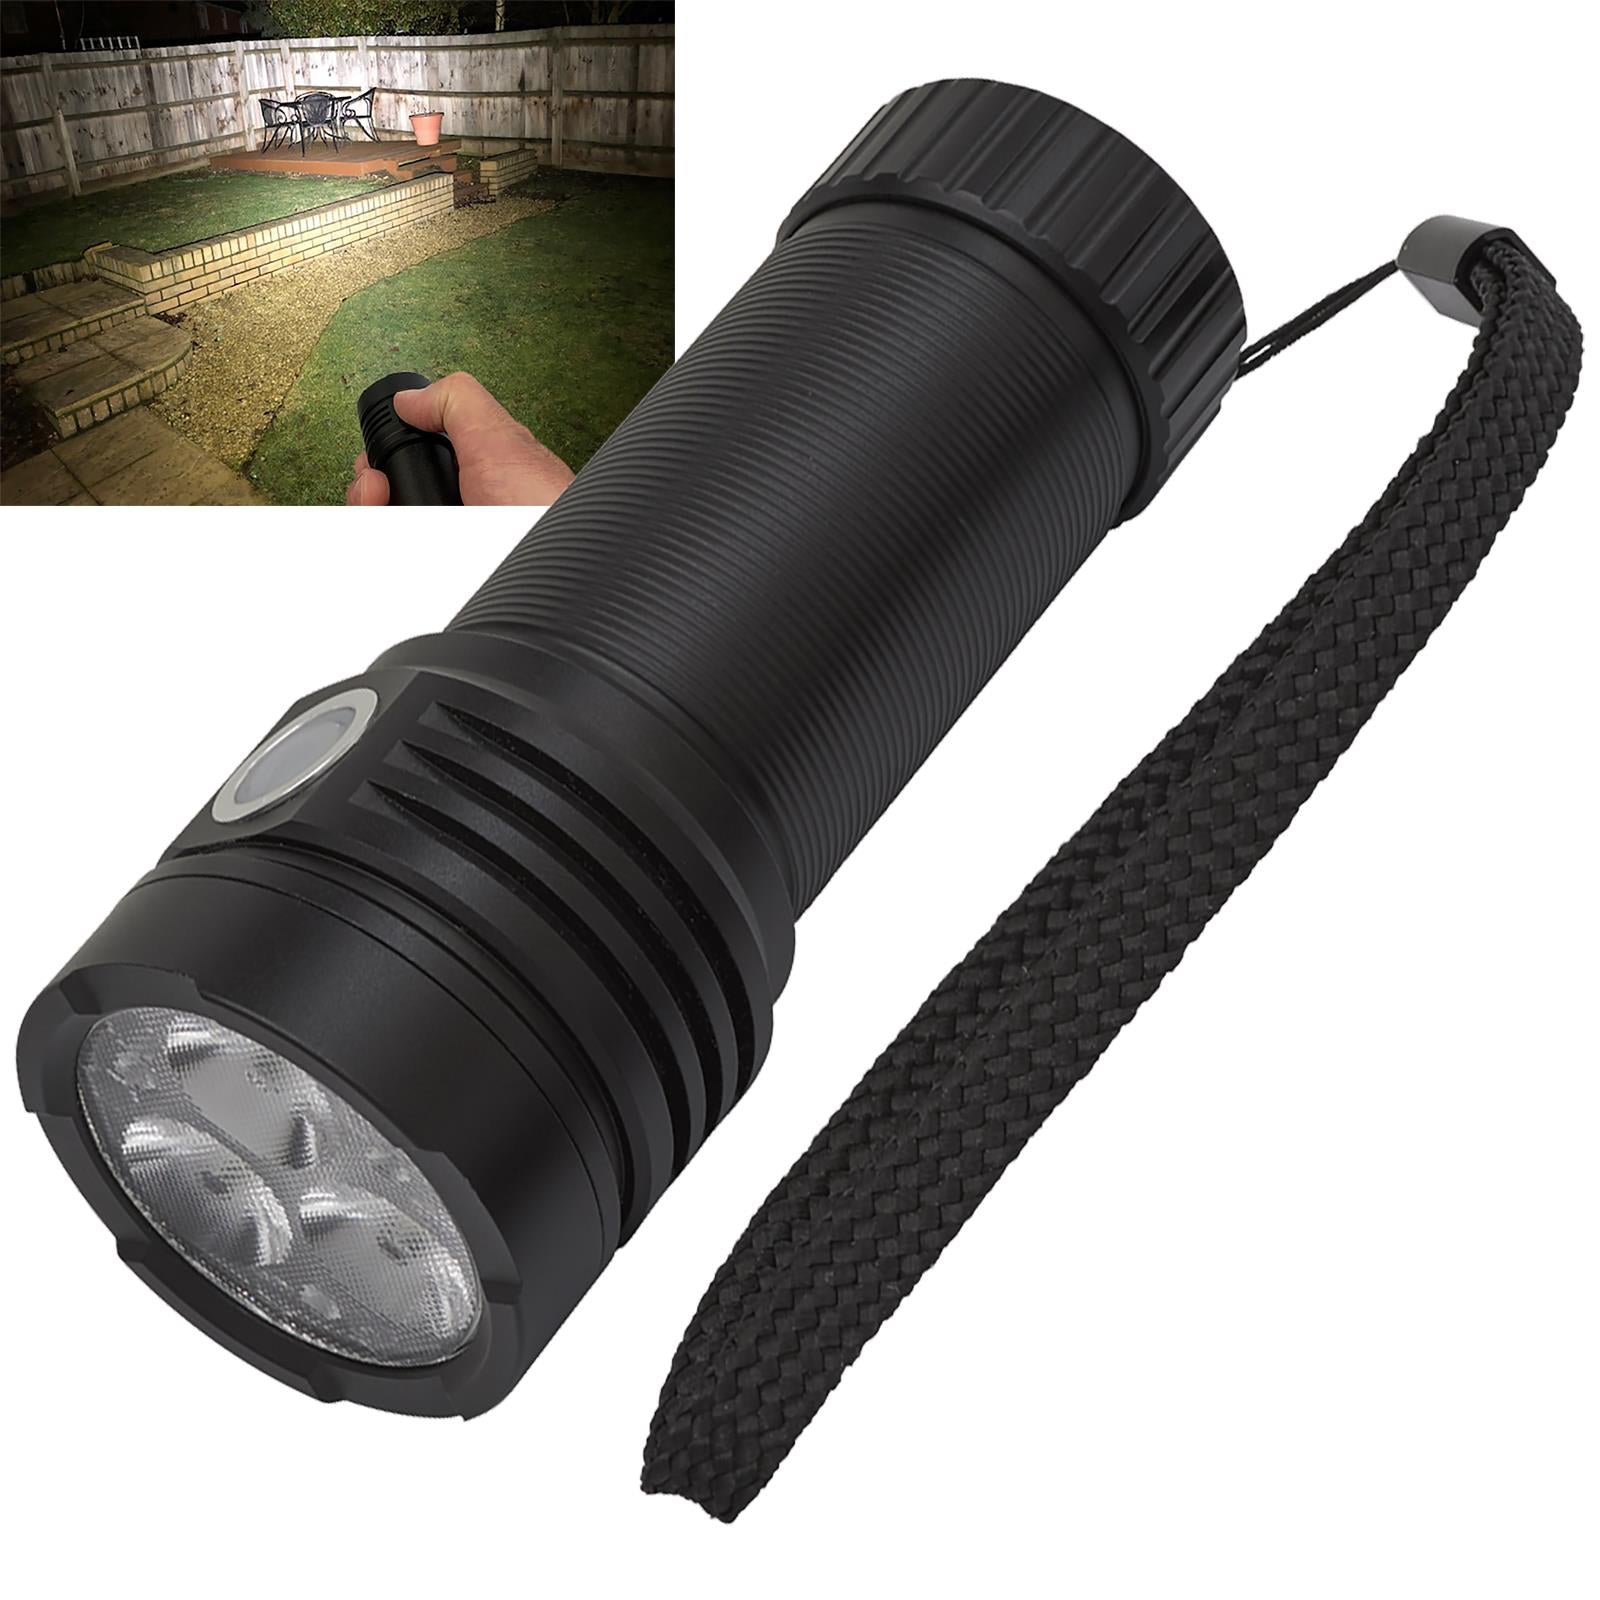 Sealey Pocket Light Torch Super Boost 3500 Lumens Rechargeable Osram P9 LED 30W